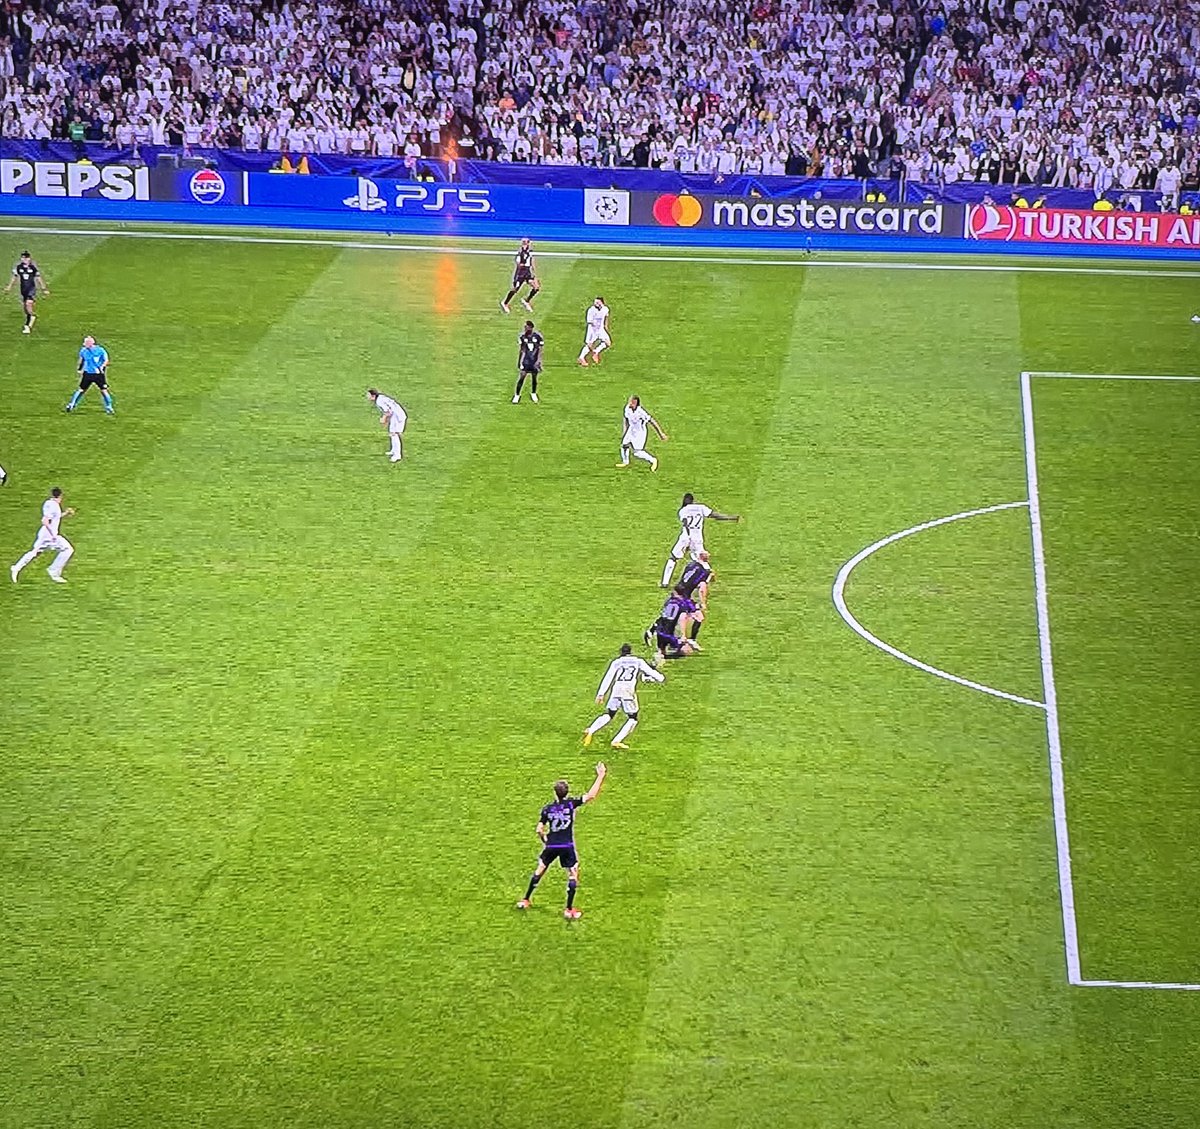 No matter if this was offside or onside: This is a close call. And the rules say, for close calls like this you MUST keep playing until the attack is over, then check VAR. If this happens in a 2nd Bundesliga mid table game nobody cares. But this is literally the UCL semi final.